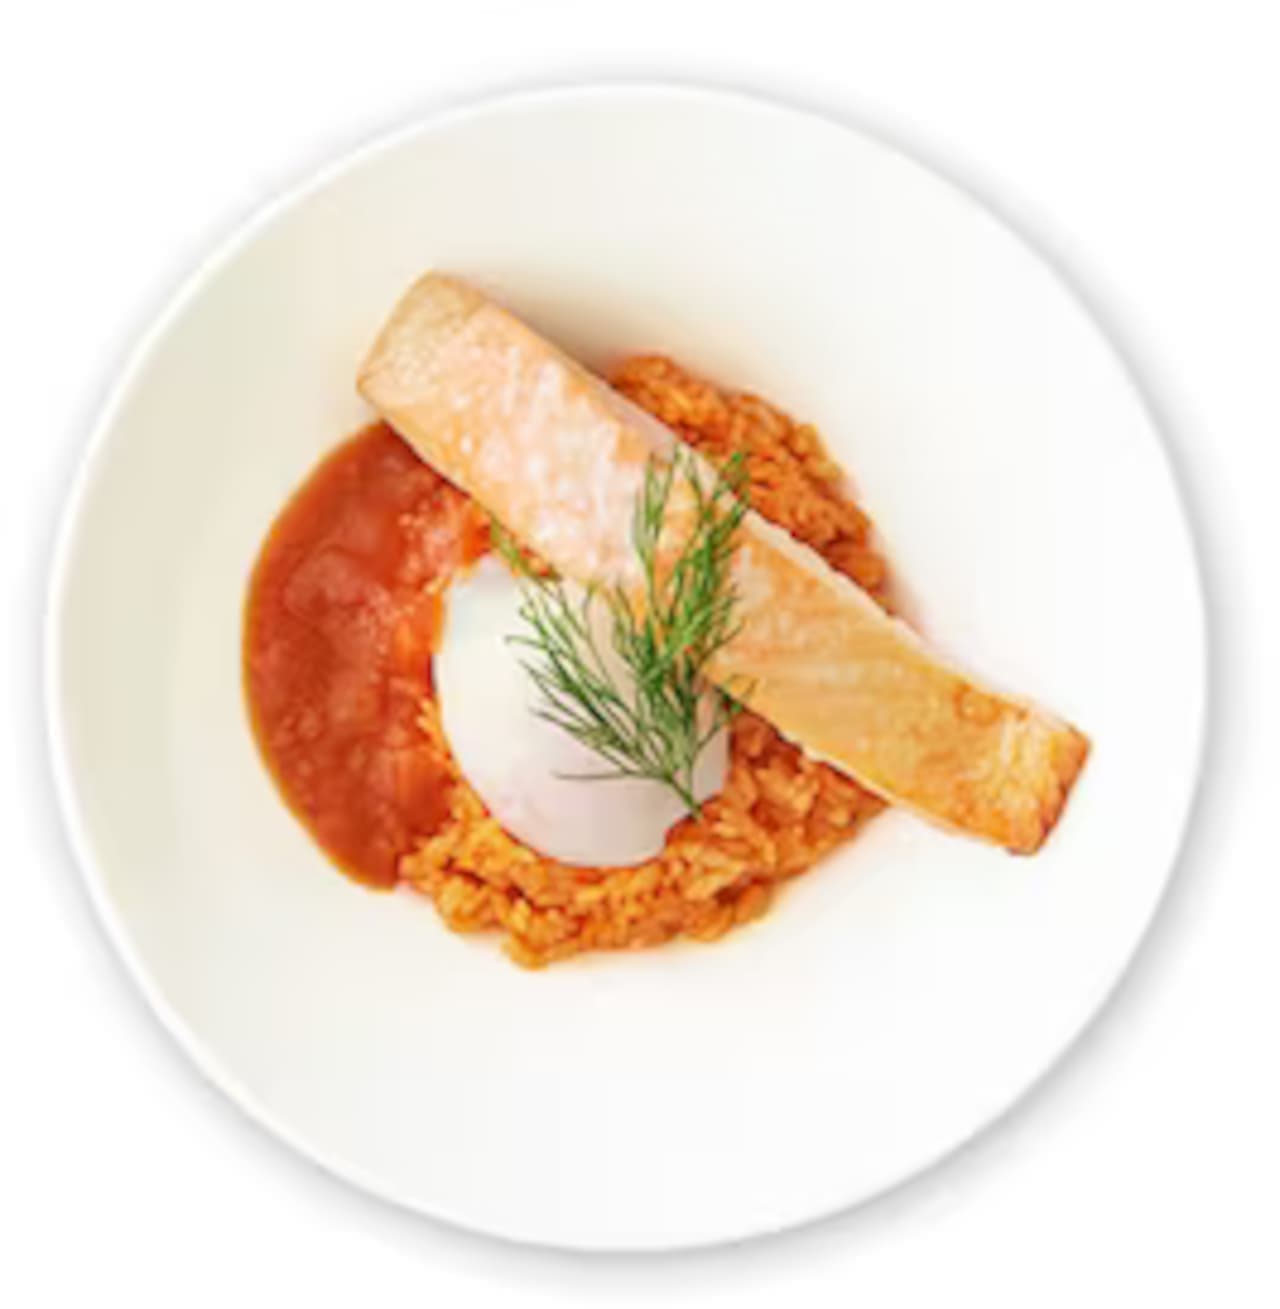 IKEA "Salmon Fillet with Ketchup Rice